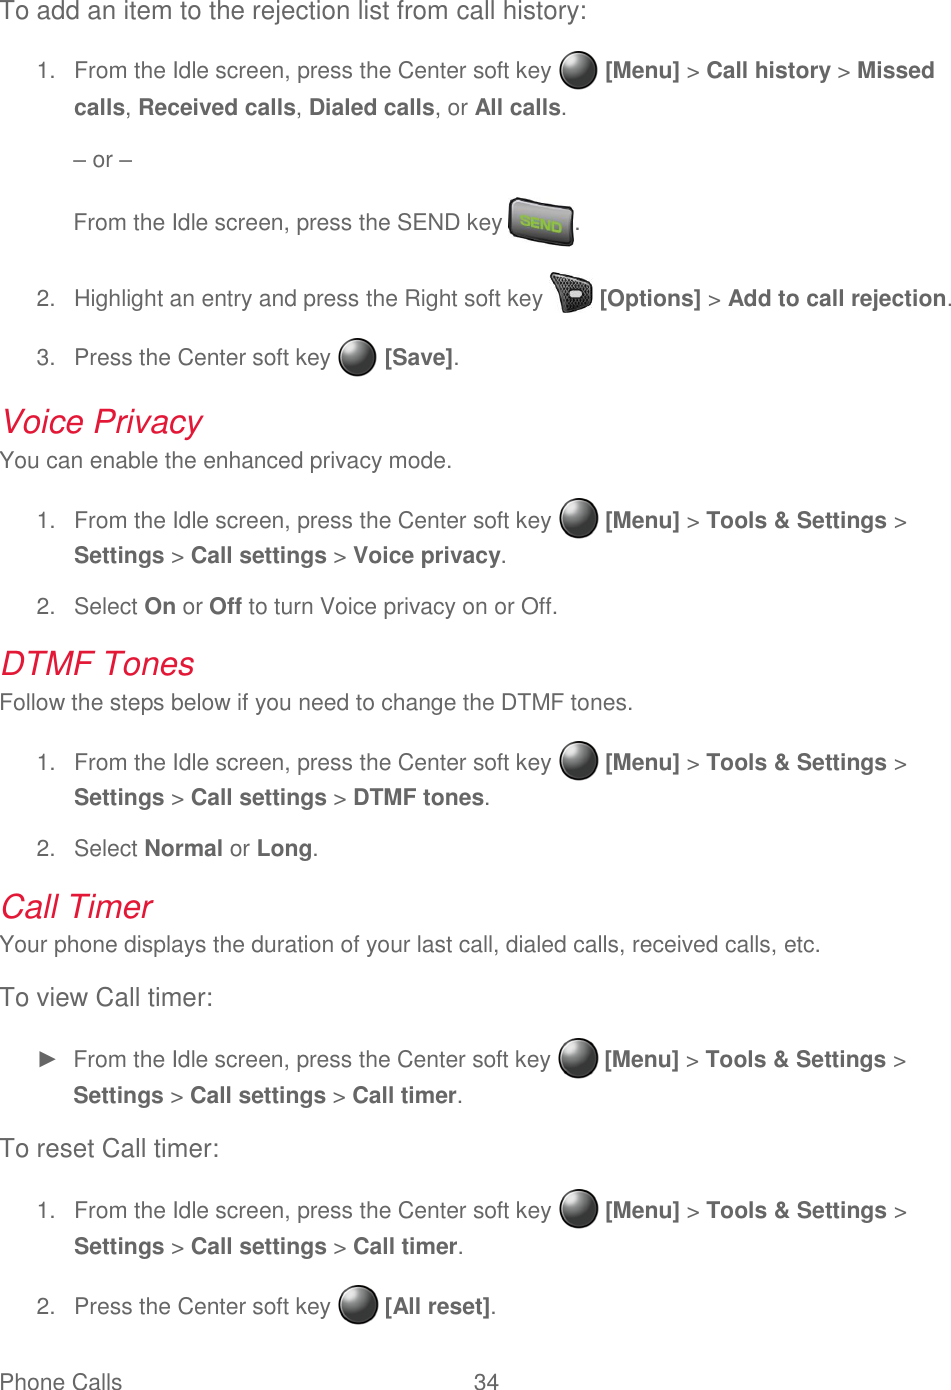 Phone Calls  34   To add an item to the rejection list from call history:   From the Idle screen, press the Center soft key   [Menu] &gt; Call history &gt; Missed 1.calls, Received calls, Dialed calls, or All calls. – or – From the Idle screen, press the SEND key  .   Highlight an entry and press the Right soft key   [Options] &gt; Add to call rejection. 2.  Press the Center soft key   [Save]. 3.Voice Privacy You can enable the enhanced privacy mode.   From the Idle screen, press the Center soft key   [Menu] &gt; Tools &amp; Settings &gt; 1.Settings &gt; Call settings &gt; Voice privacy.   Select On or Off to turn Voice privacy on or Off. 2.DTMF Tones Follow the steps below if you need to change the DTMF tones.   From the Idle screen, press the Center soft key   [Menu] &gt; Tools &amp; Settings &gt; 1.Settings &gt; Call settings &gt; DTMF tones.   Select Normal or Long. 2.Call Timer Your phone displays the duration of your last call, dialed calls, received calls, etc. To view Call timer: ►  From the Idle screen, press the Center soft key   [Menu] &gt; Tools &amp; Settings &gt; Settings &gt; Call settings &gt; Call timer. To reset Call timer:   From the Idle screen, press the Center soft key   [Menu] &gt; Tools &amp; Settings &gt; 1.Settings &gt; Call settings &gt; Call timer.   Press the Center soft key   [All reset]. 2.